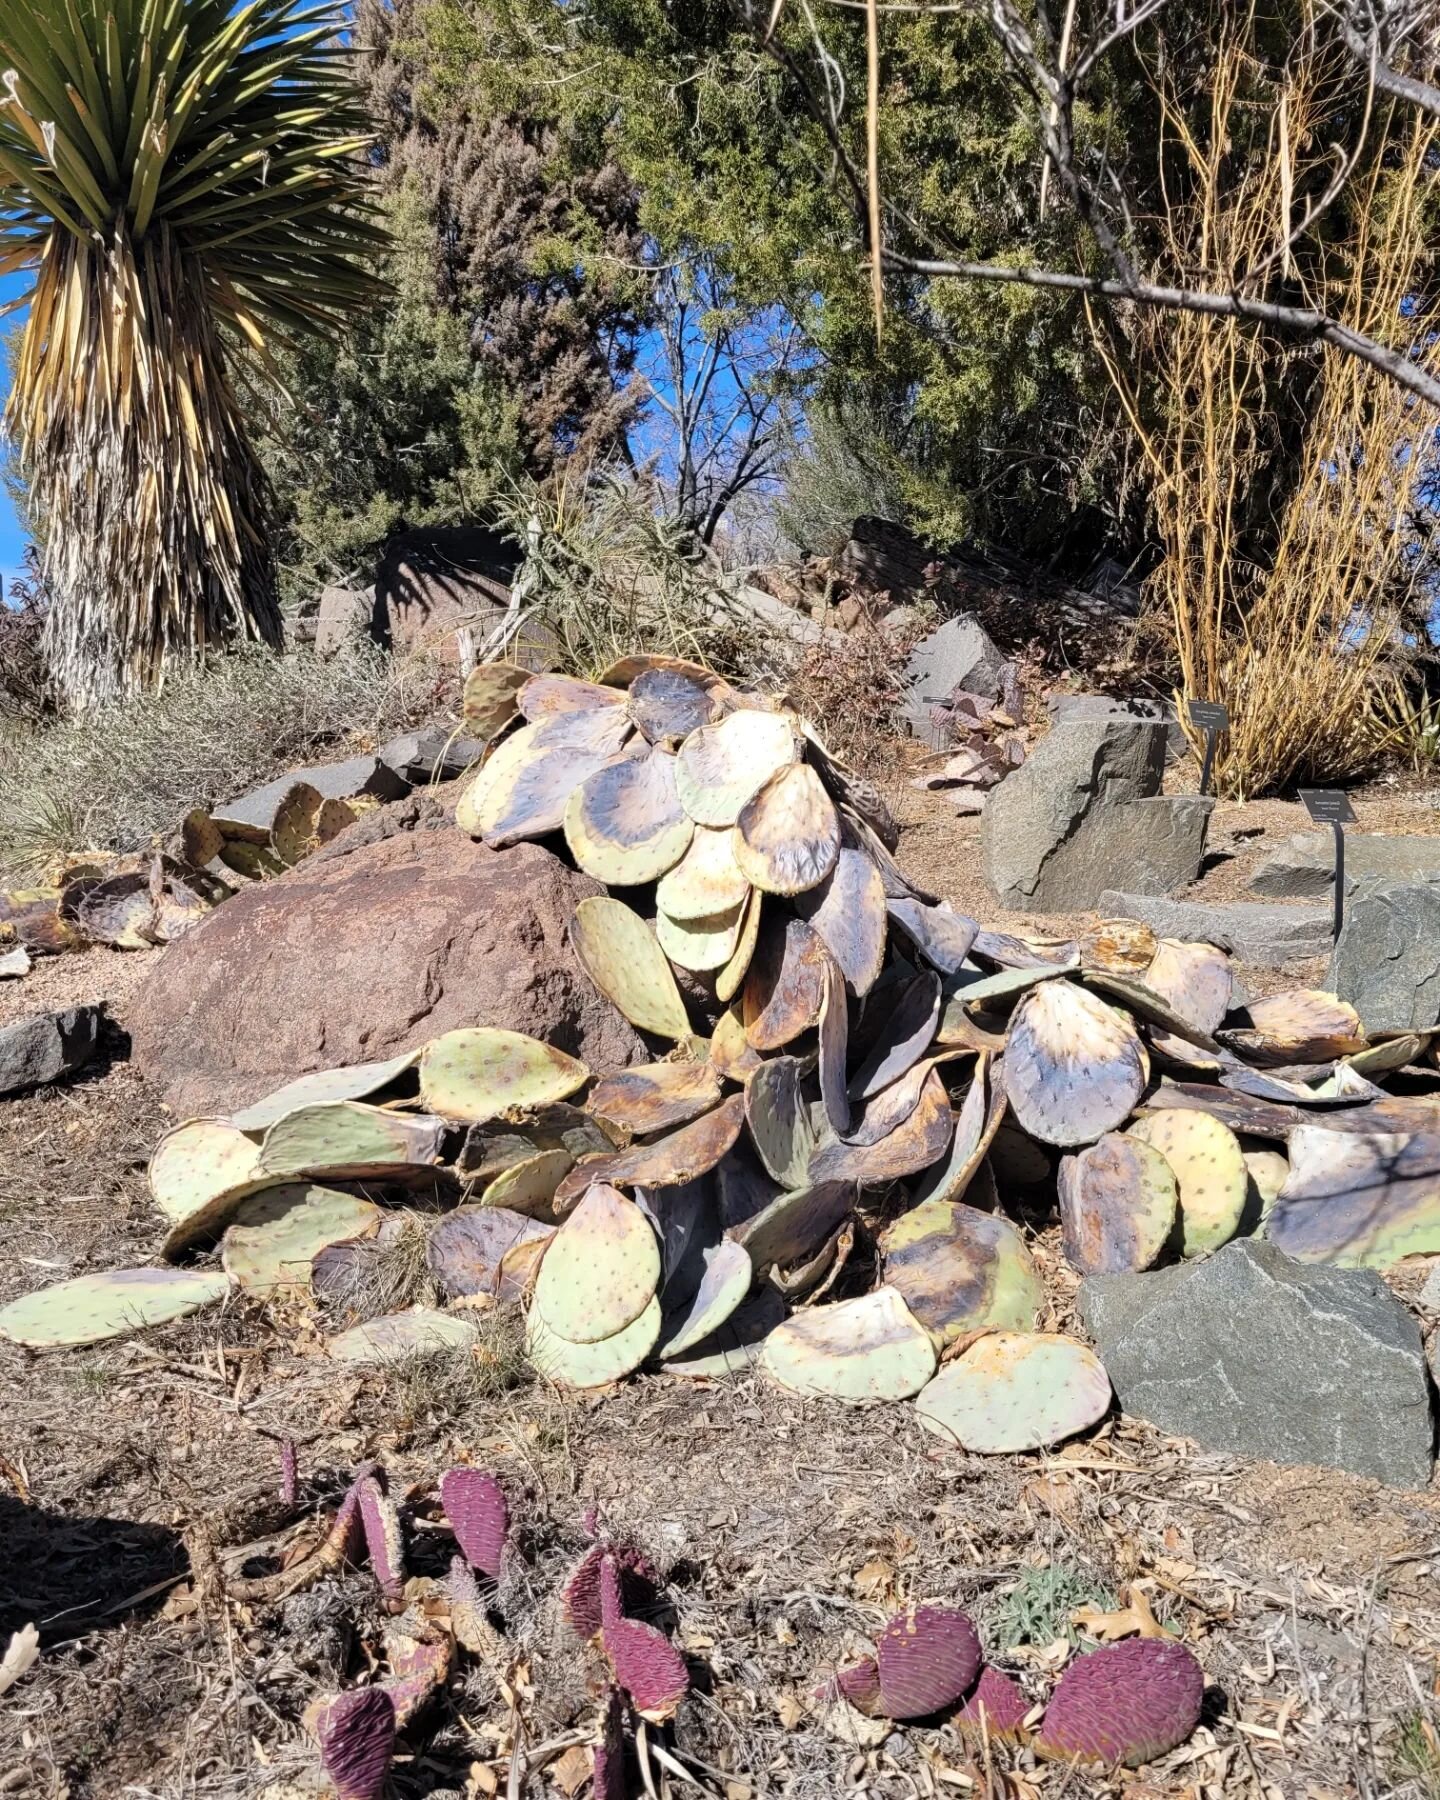 Spent the day Sunday studying some of the desert plants @denverbotanic 

It looks like some of the Prickly Pear Cactus suffered damage from the long winter we have been having.

There will be more things to come as I embark on this adventure. I am re